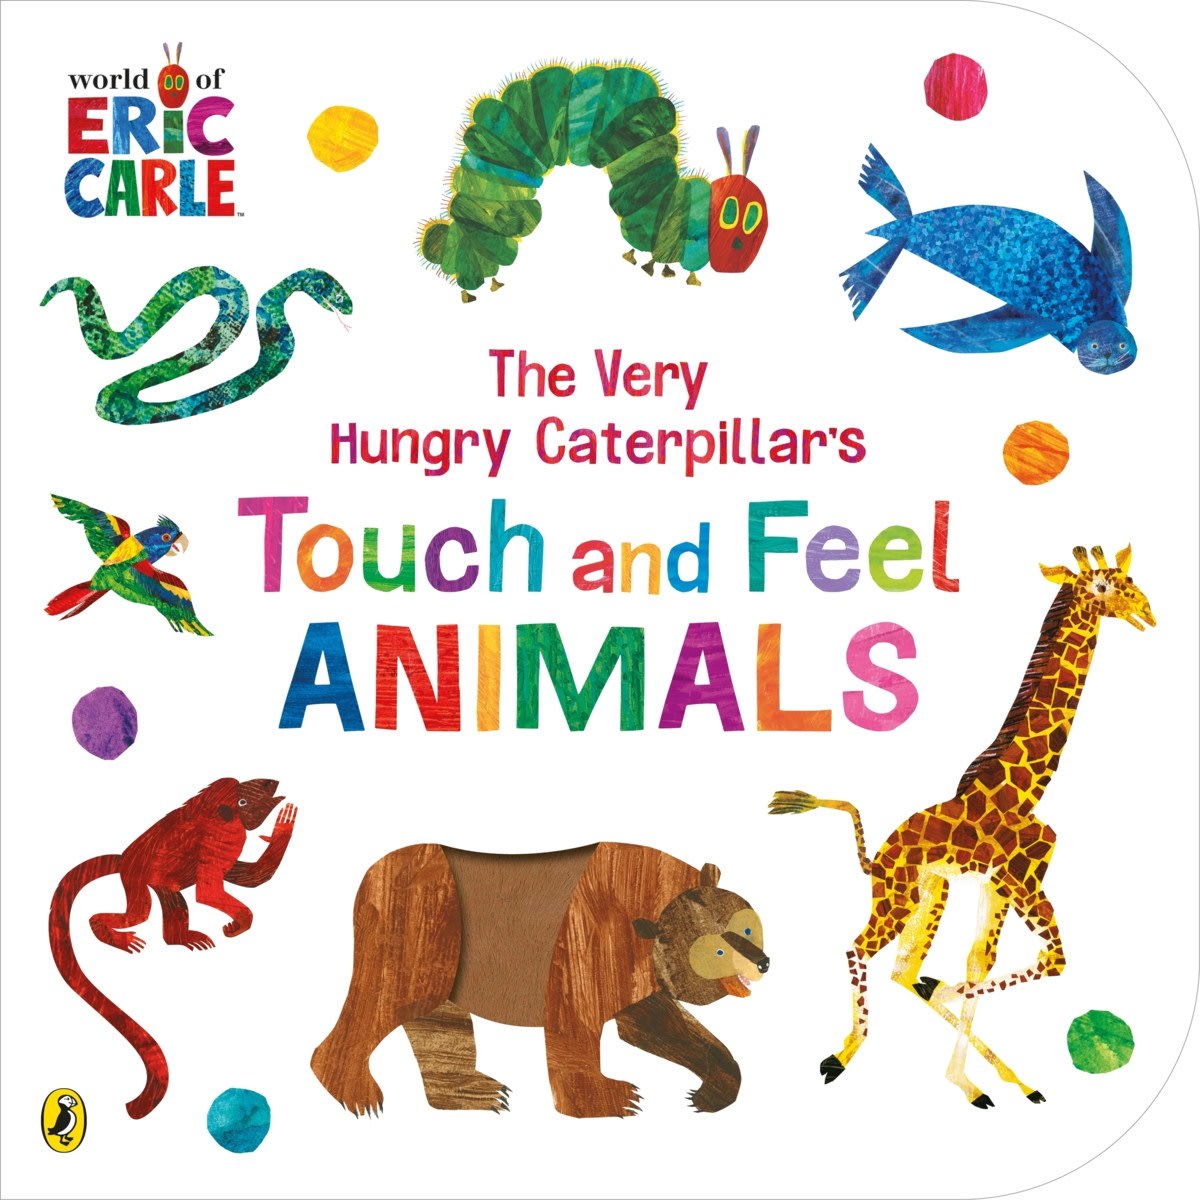 World of Eric Carle: The Very Hungry Caterpillar's Touch and Feel